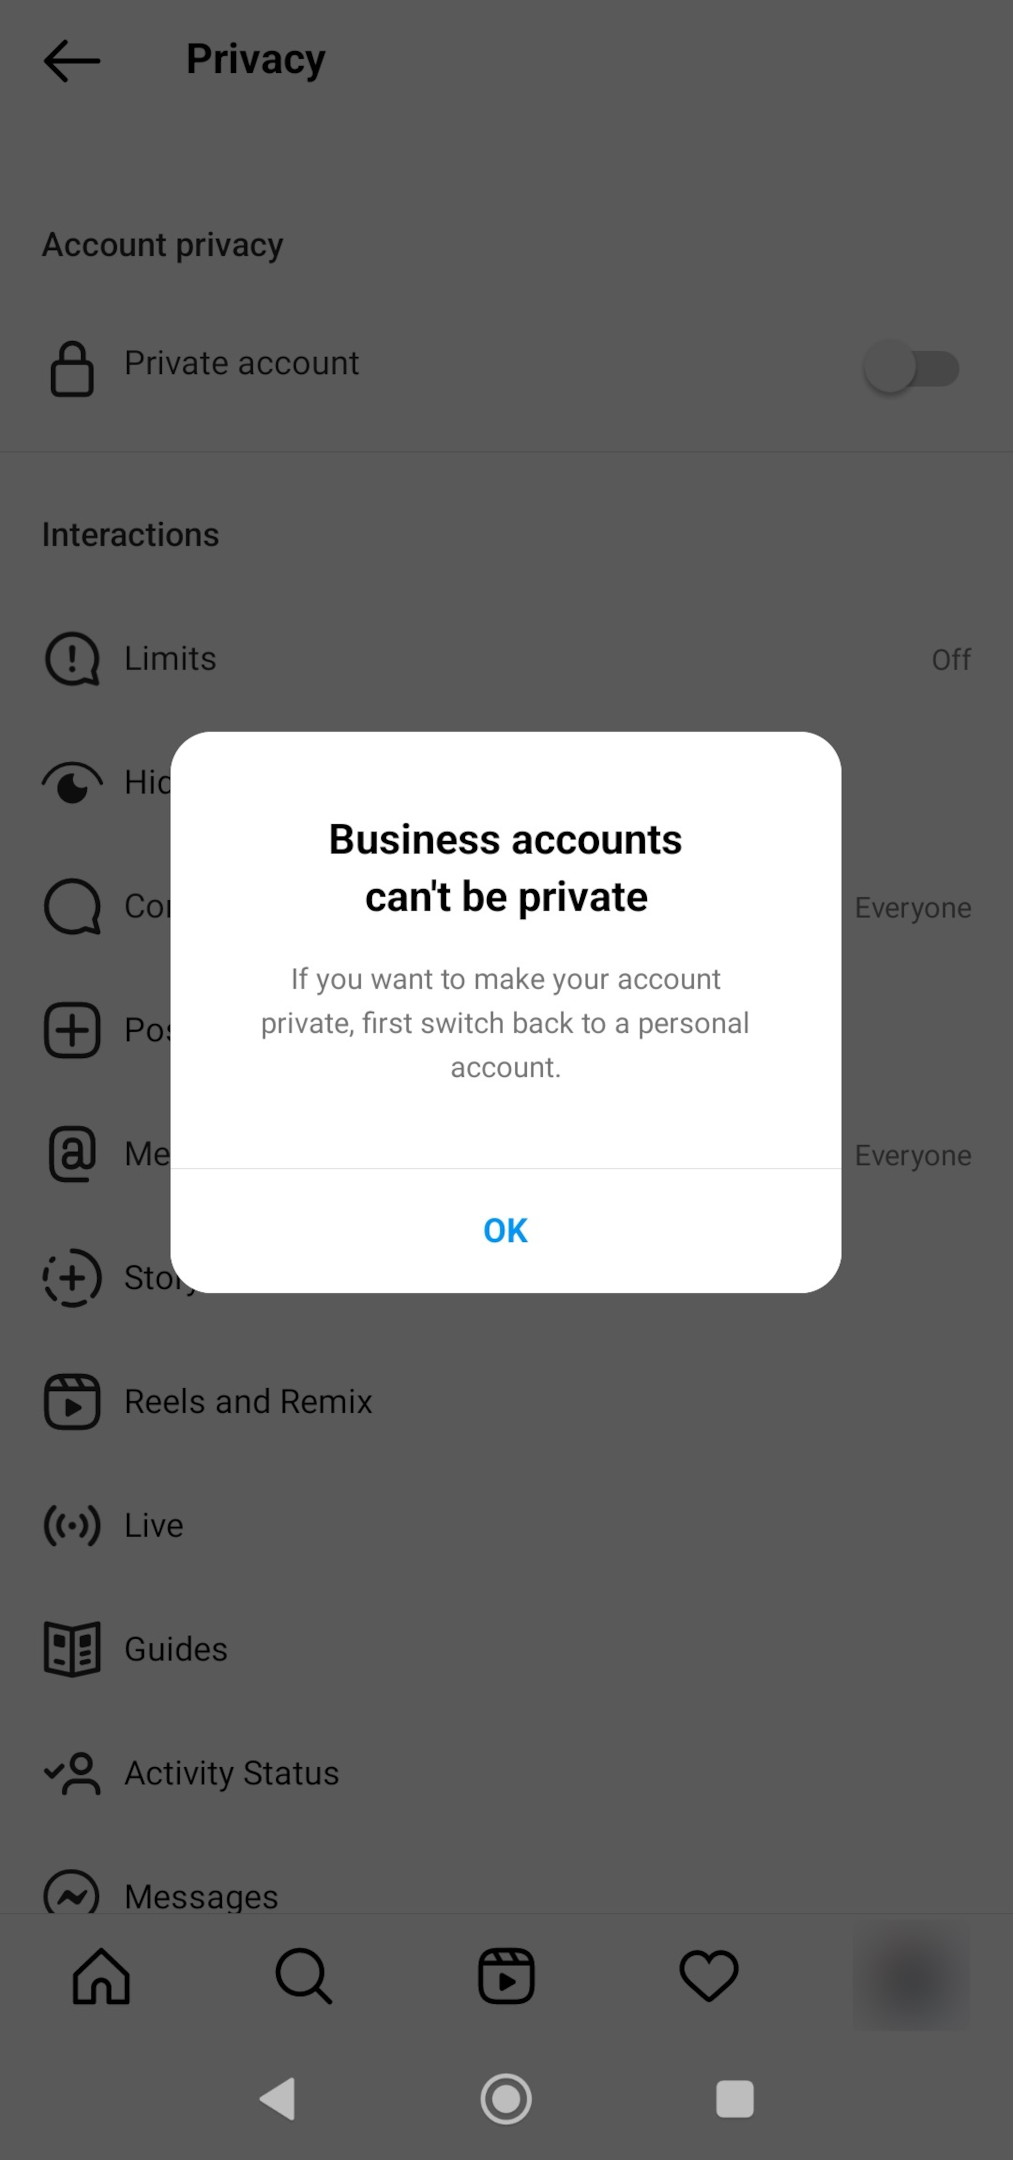 Remote.tools shows that a creator or business Instagram account can't be set to private